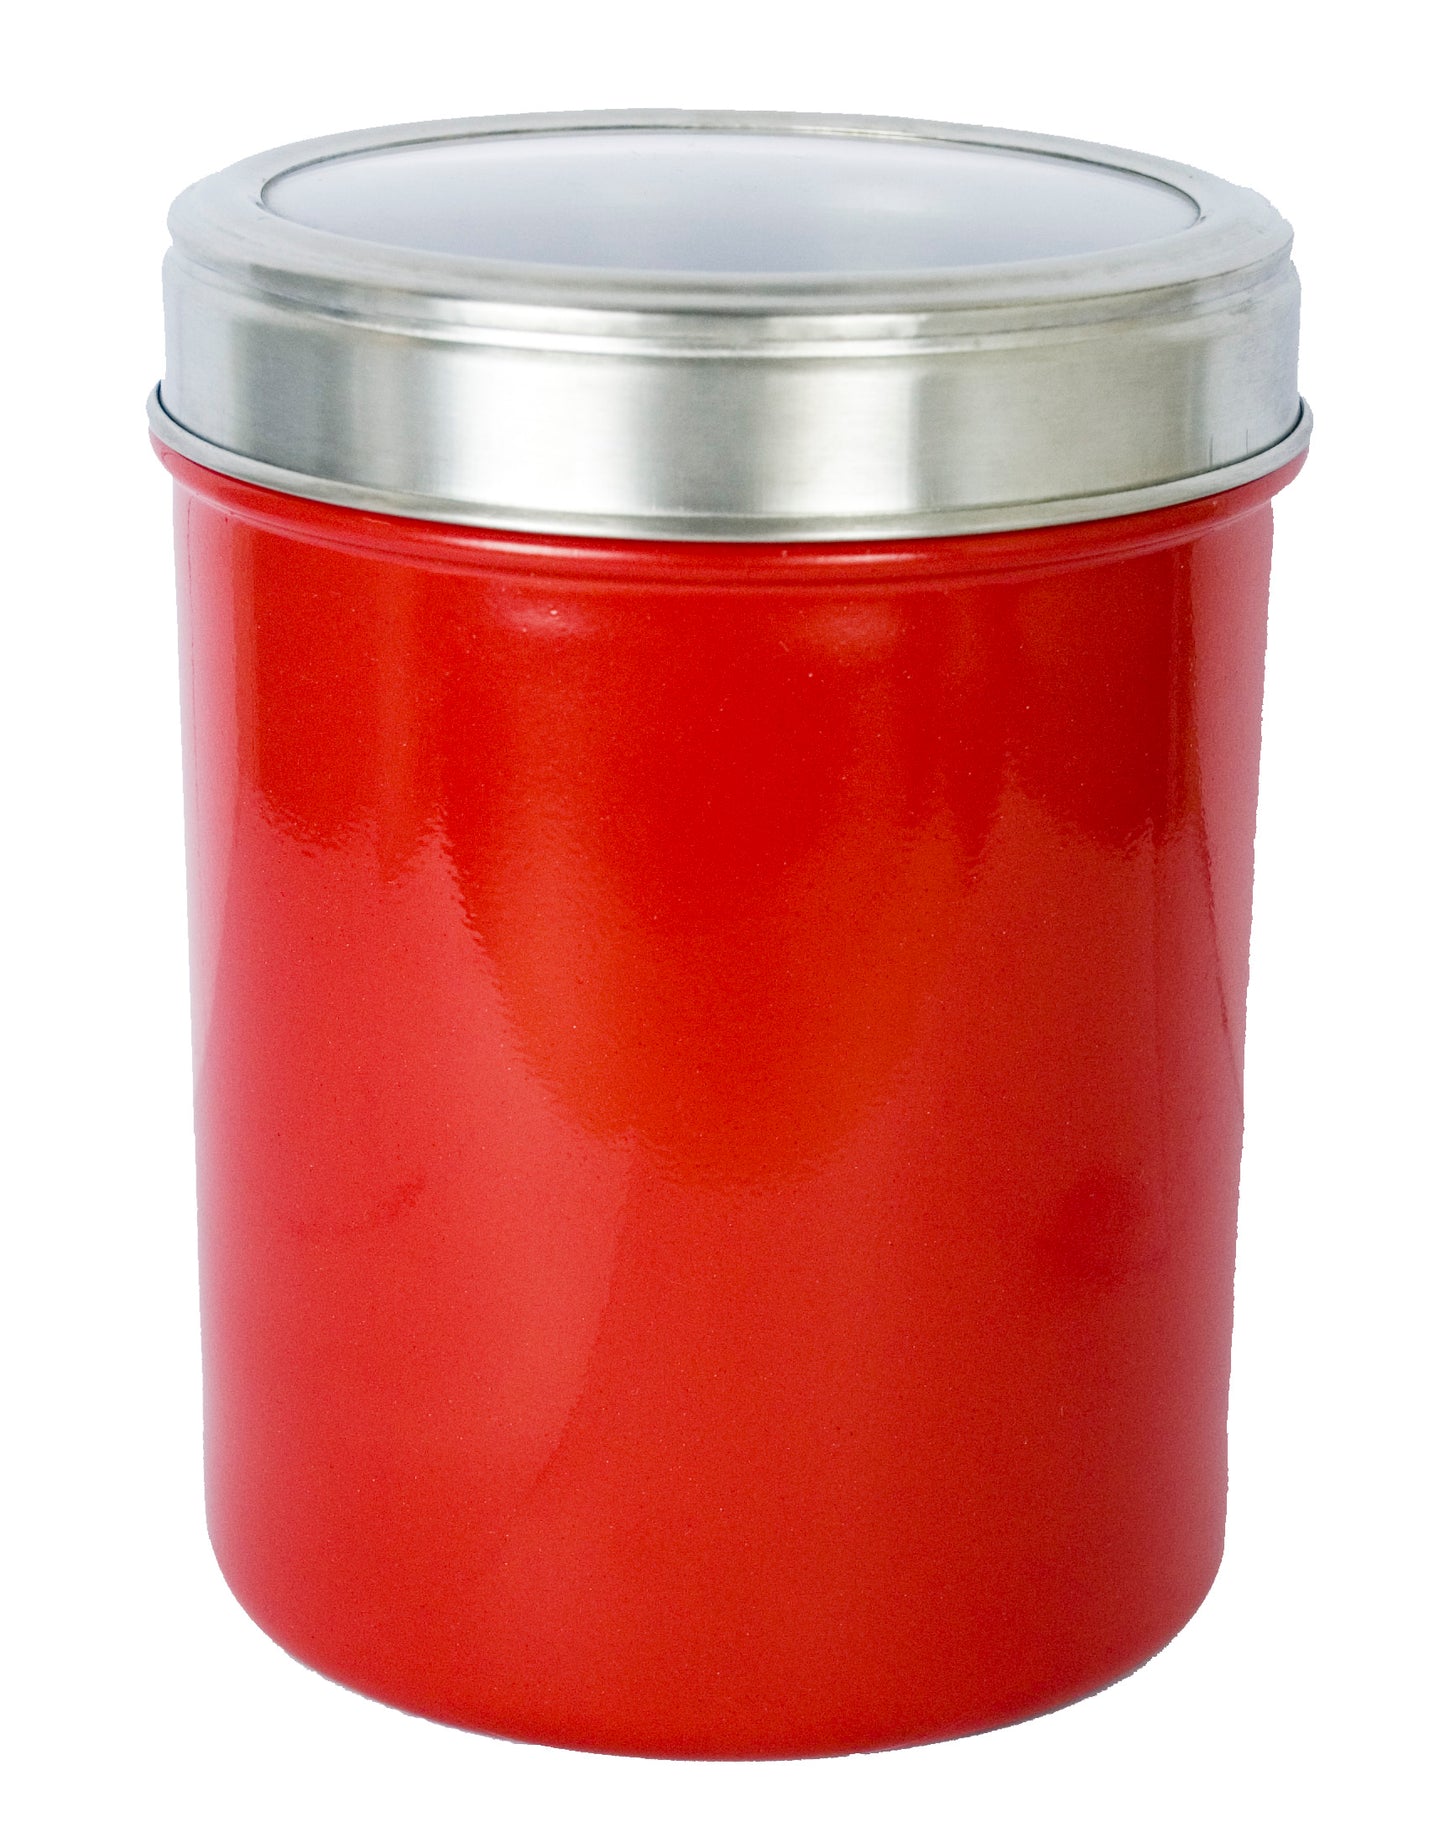 Buckingham Stainless Steel Set Storage Canisters with Cut-Out Acrylic Lid, 13 cm Red